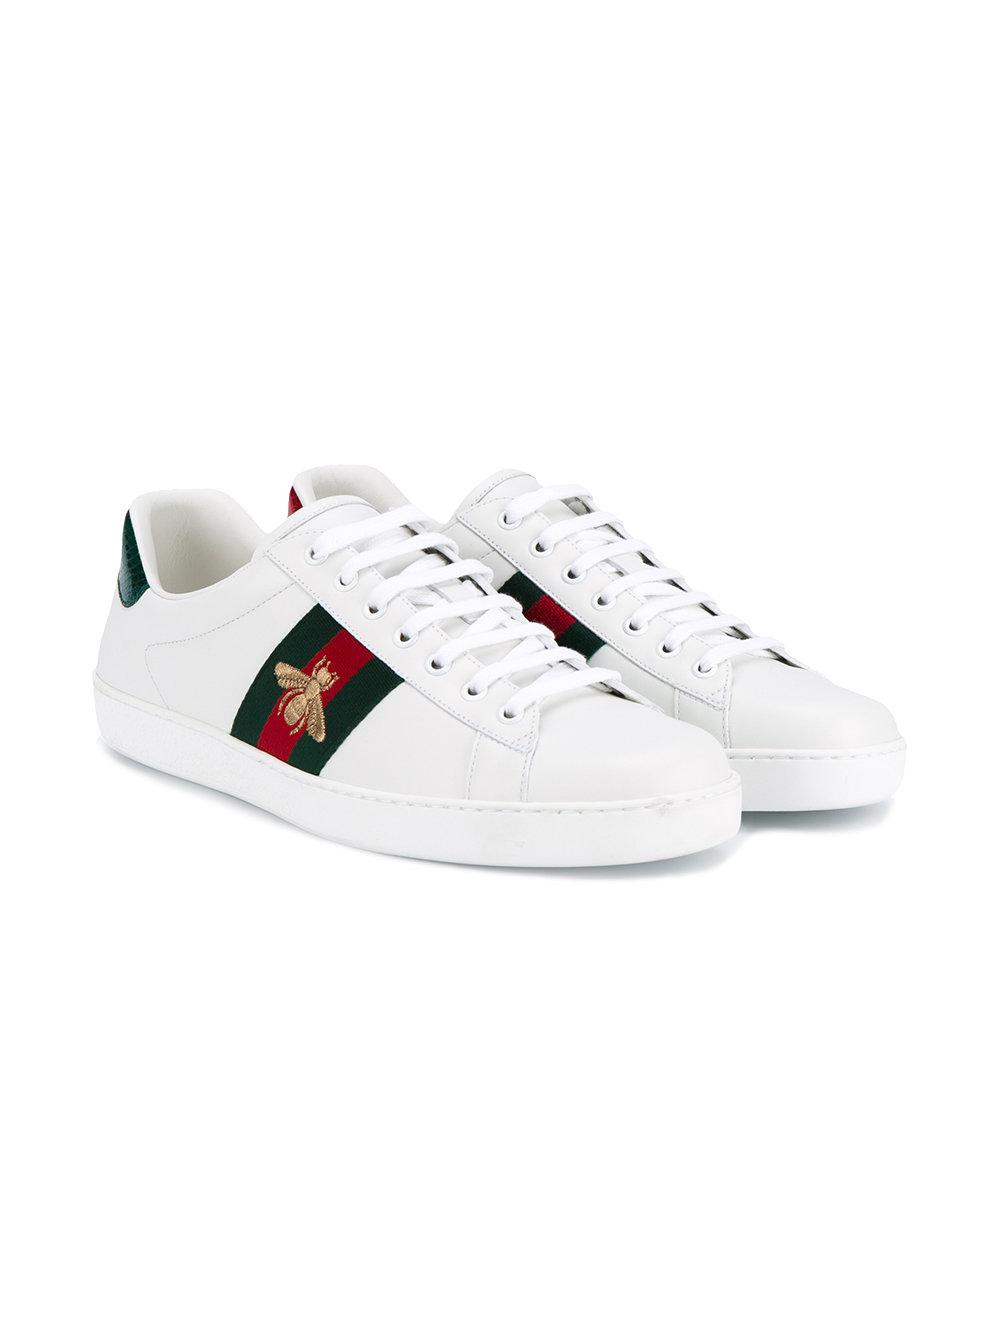 Lyst - Gucci Bee Embroidered Sneakers in White for Men